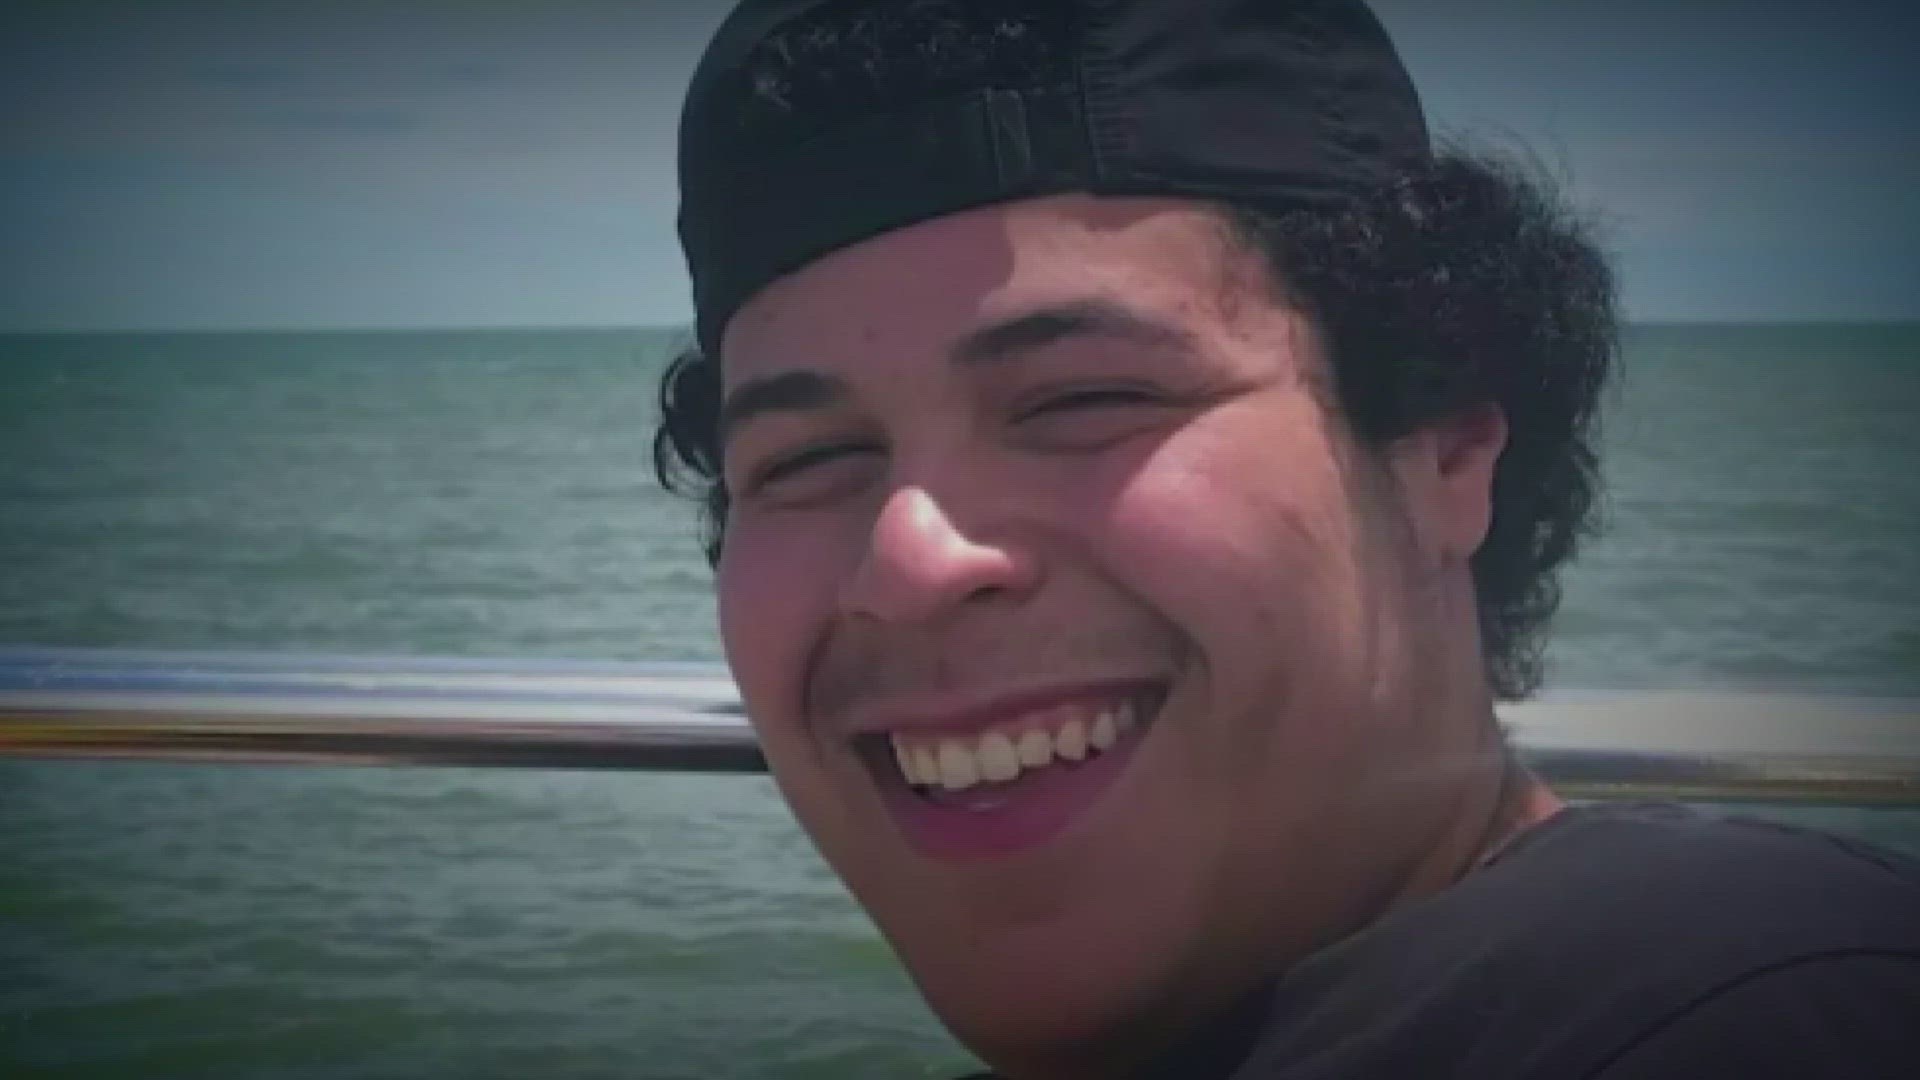 The family of Elijah Islam Safadi speaks out following his untimely death.